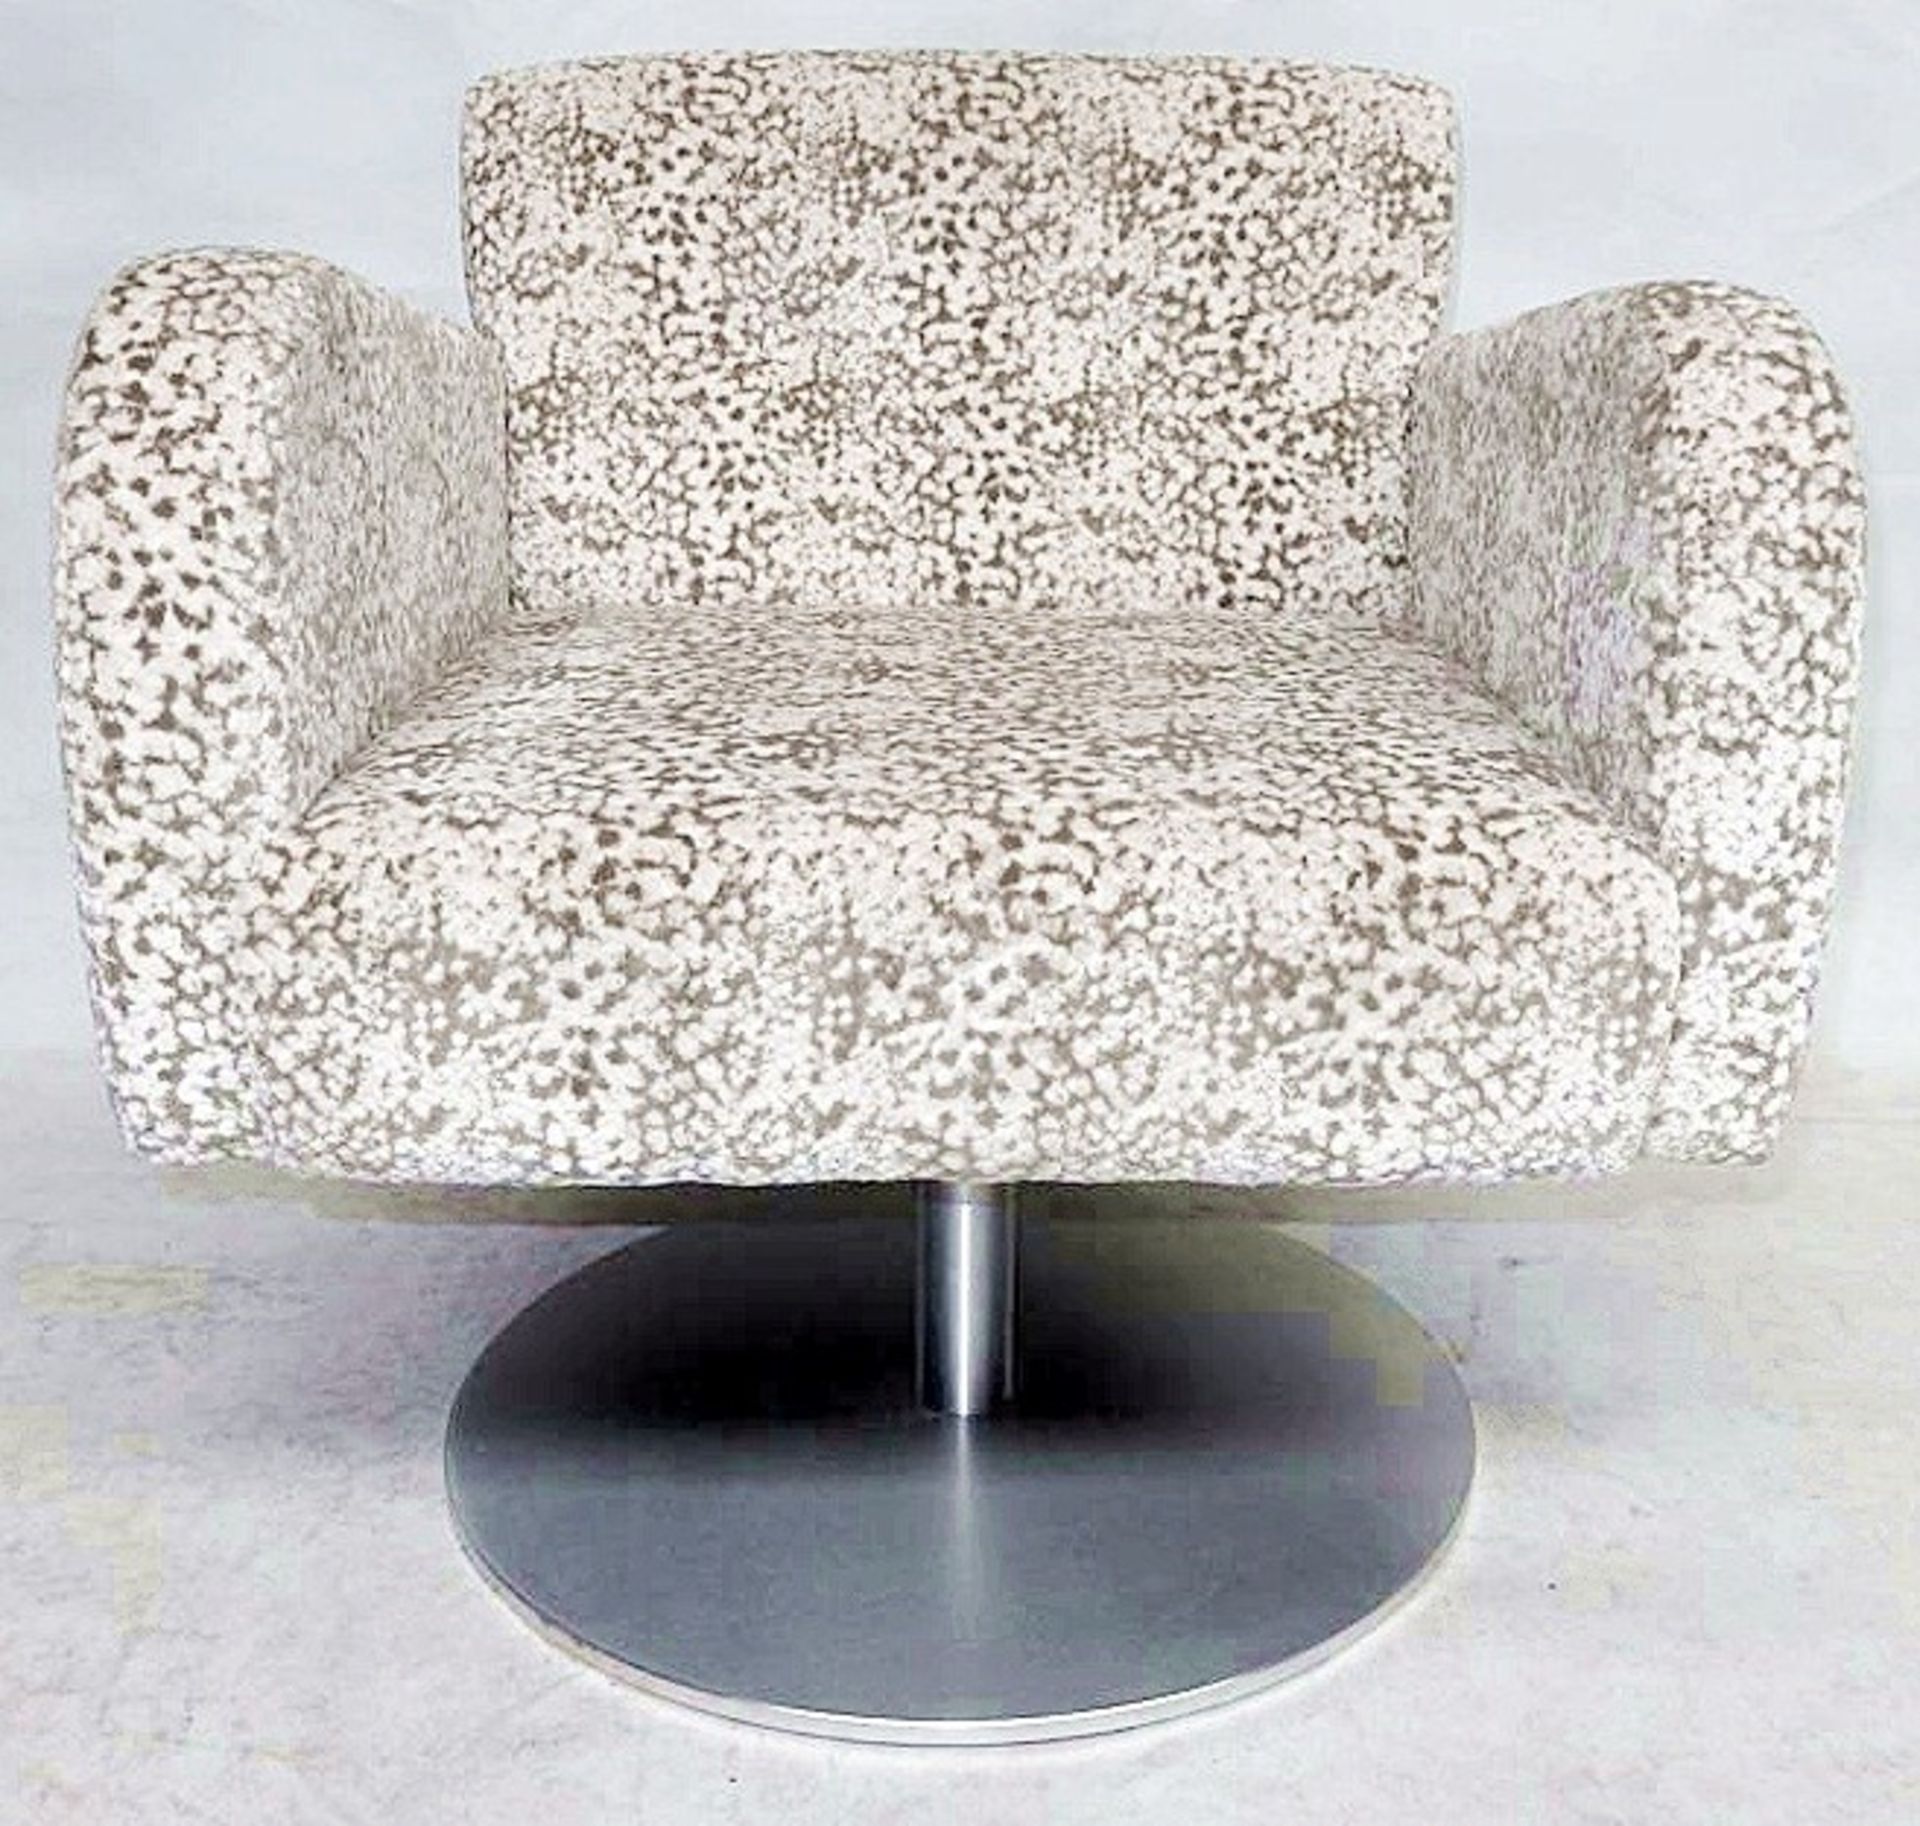 1 x Small Bespoke Swivel Chair - Upholstered In A Rich Mottled Chenille - Dimensions: W x H x D cm -